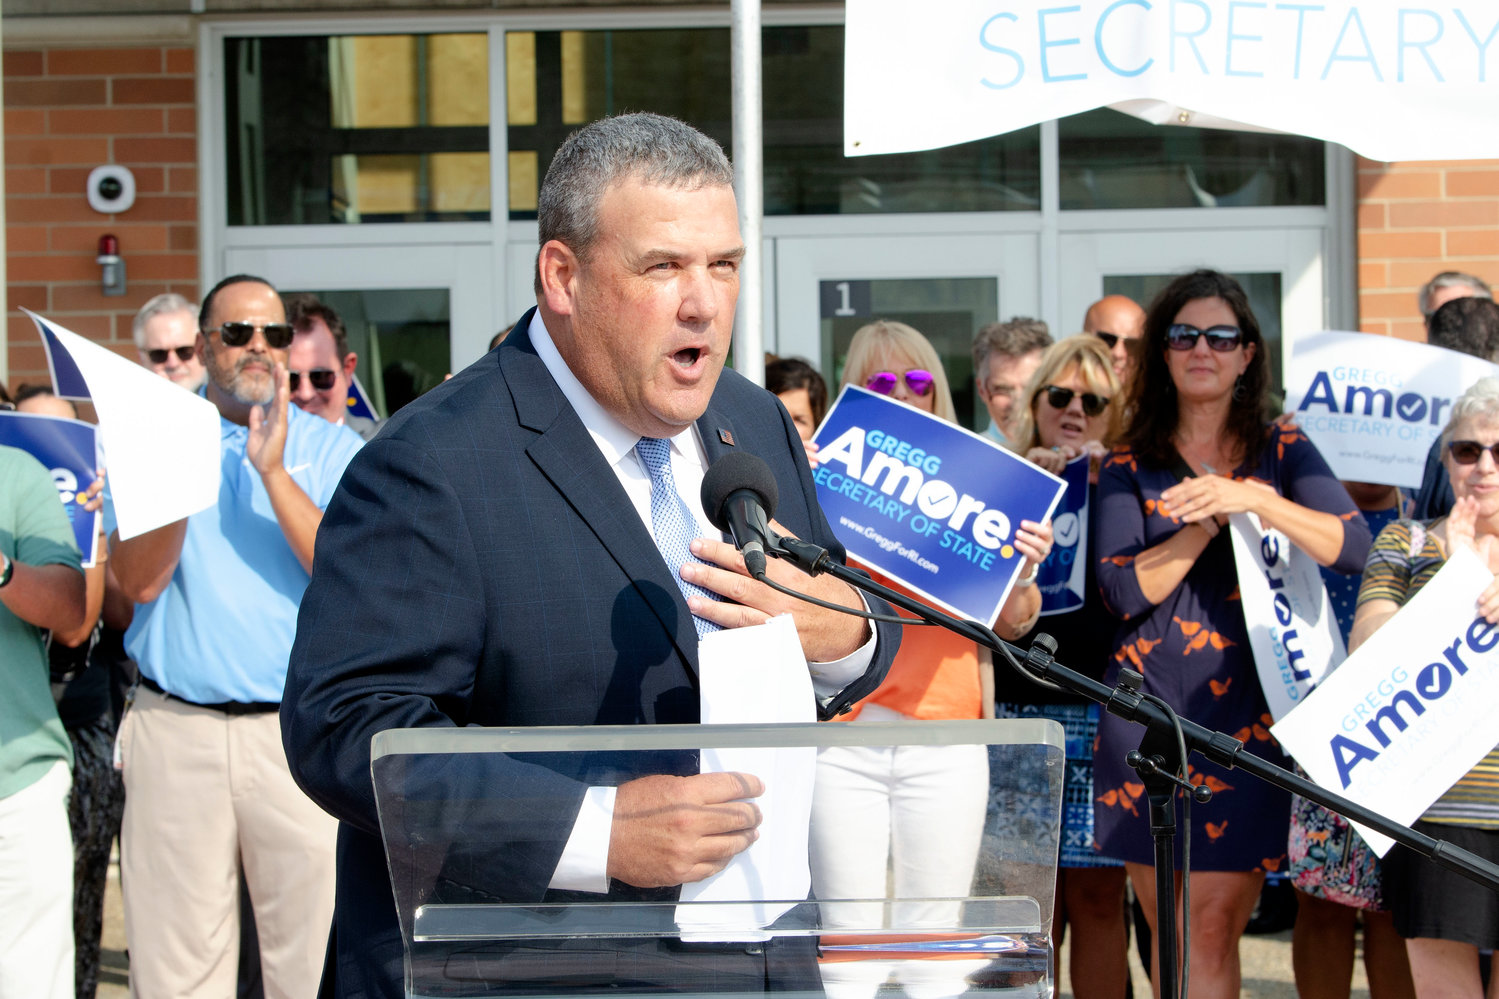 Representative Gregg Amore speaks while announcing his candidacy to be the Democratic nominee for Rhode Island's next Secretary of State during a press conference Wednesday afternoon, Sept. 15, held at his career-long place of employ,  East Providence High School.